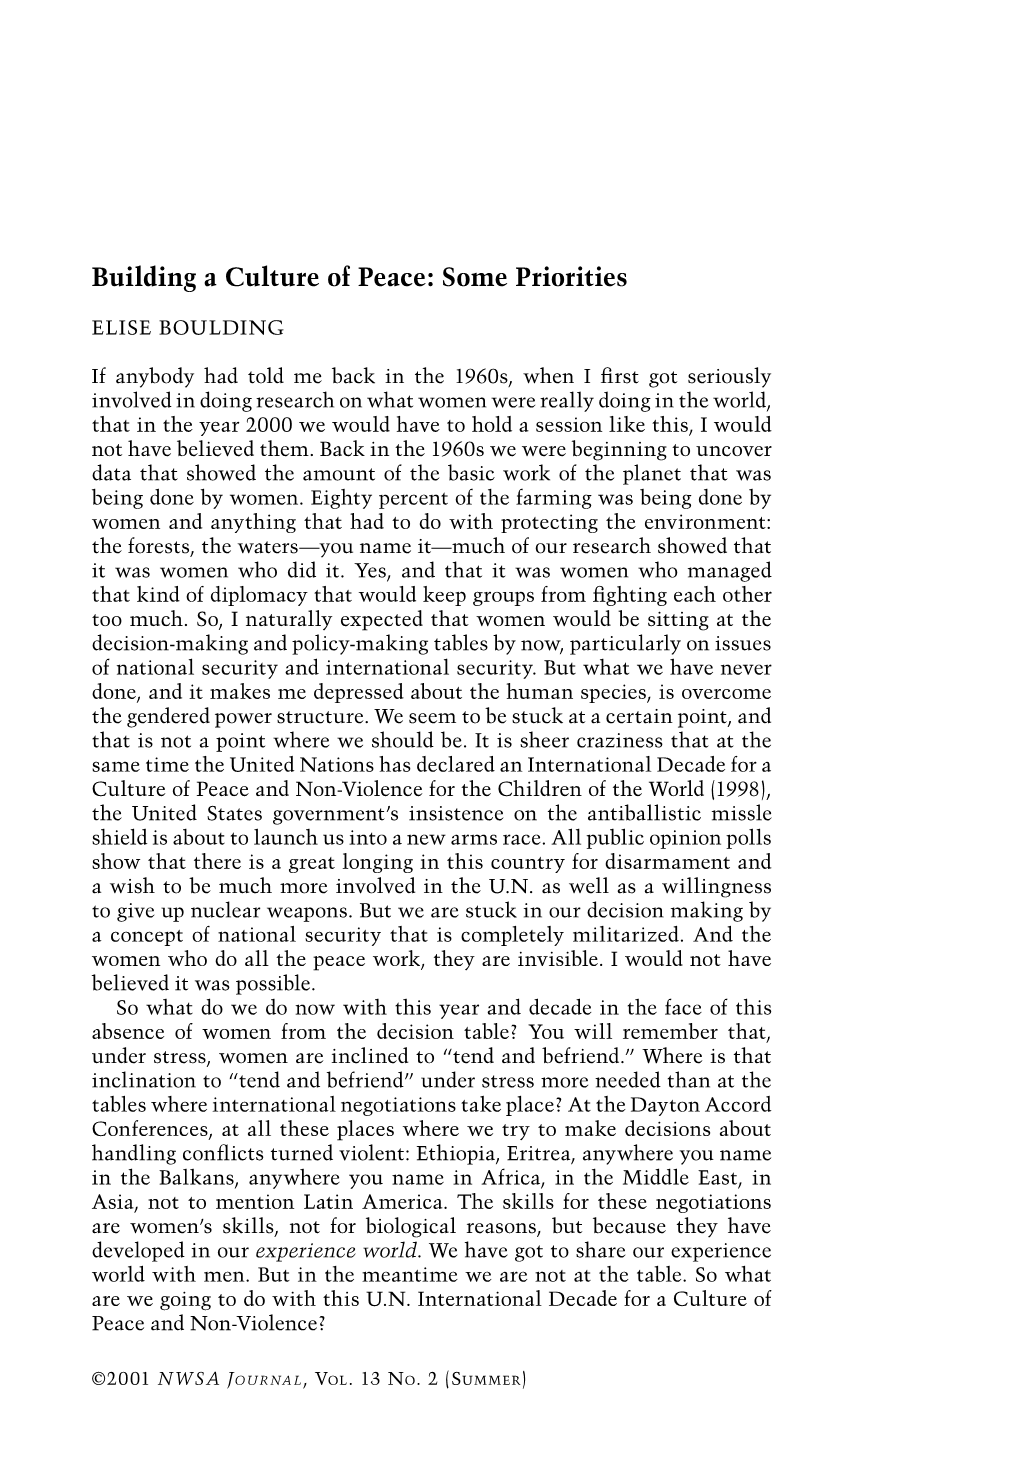 "Building a Culture of Peace: Some Priorities," by Elise Boulding